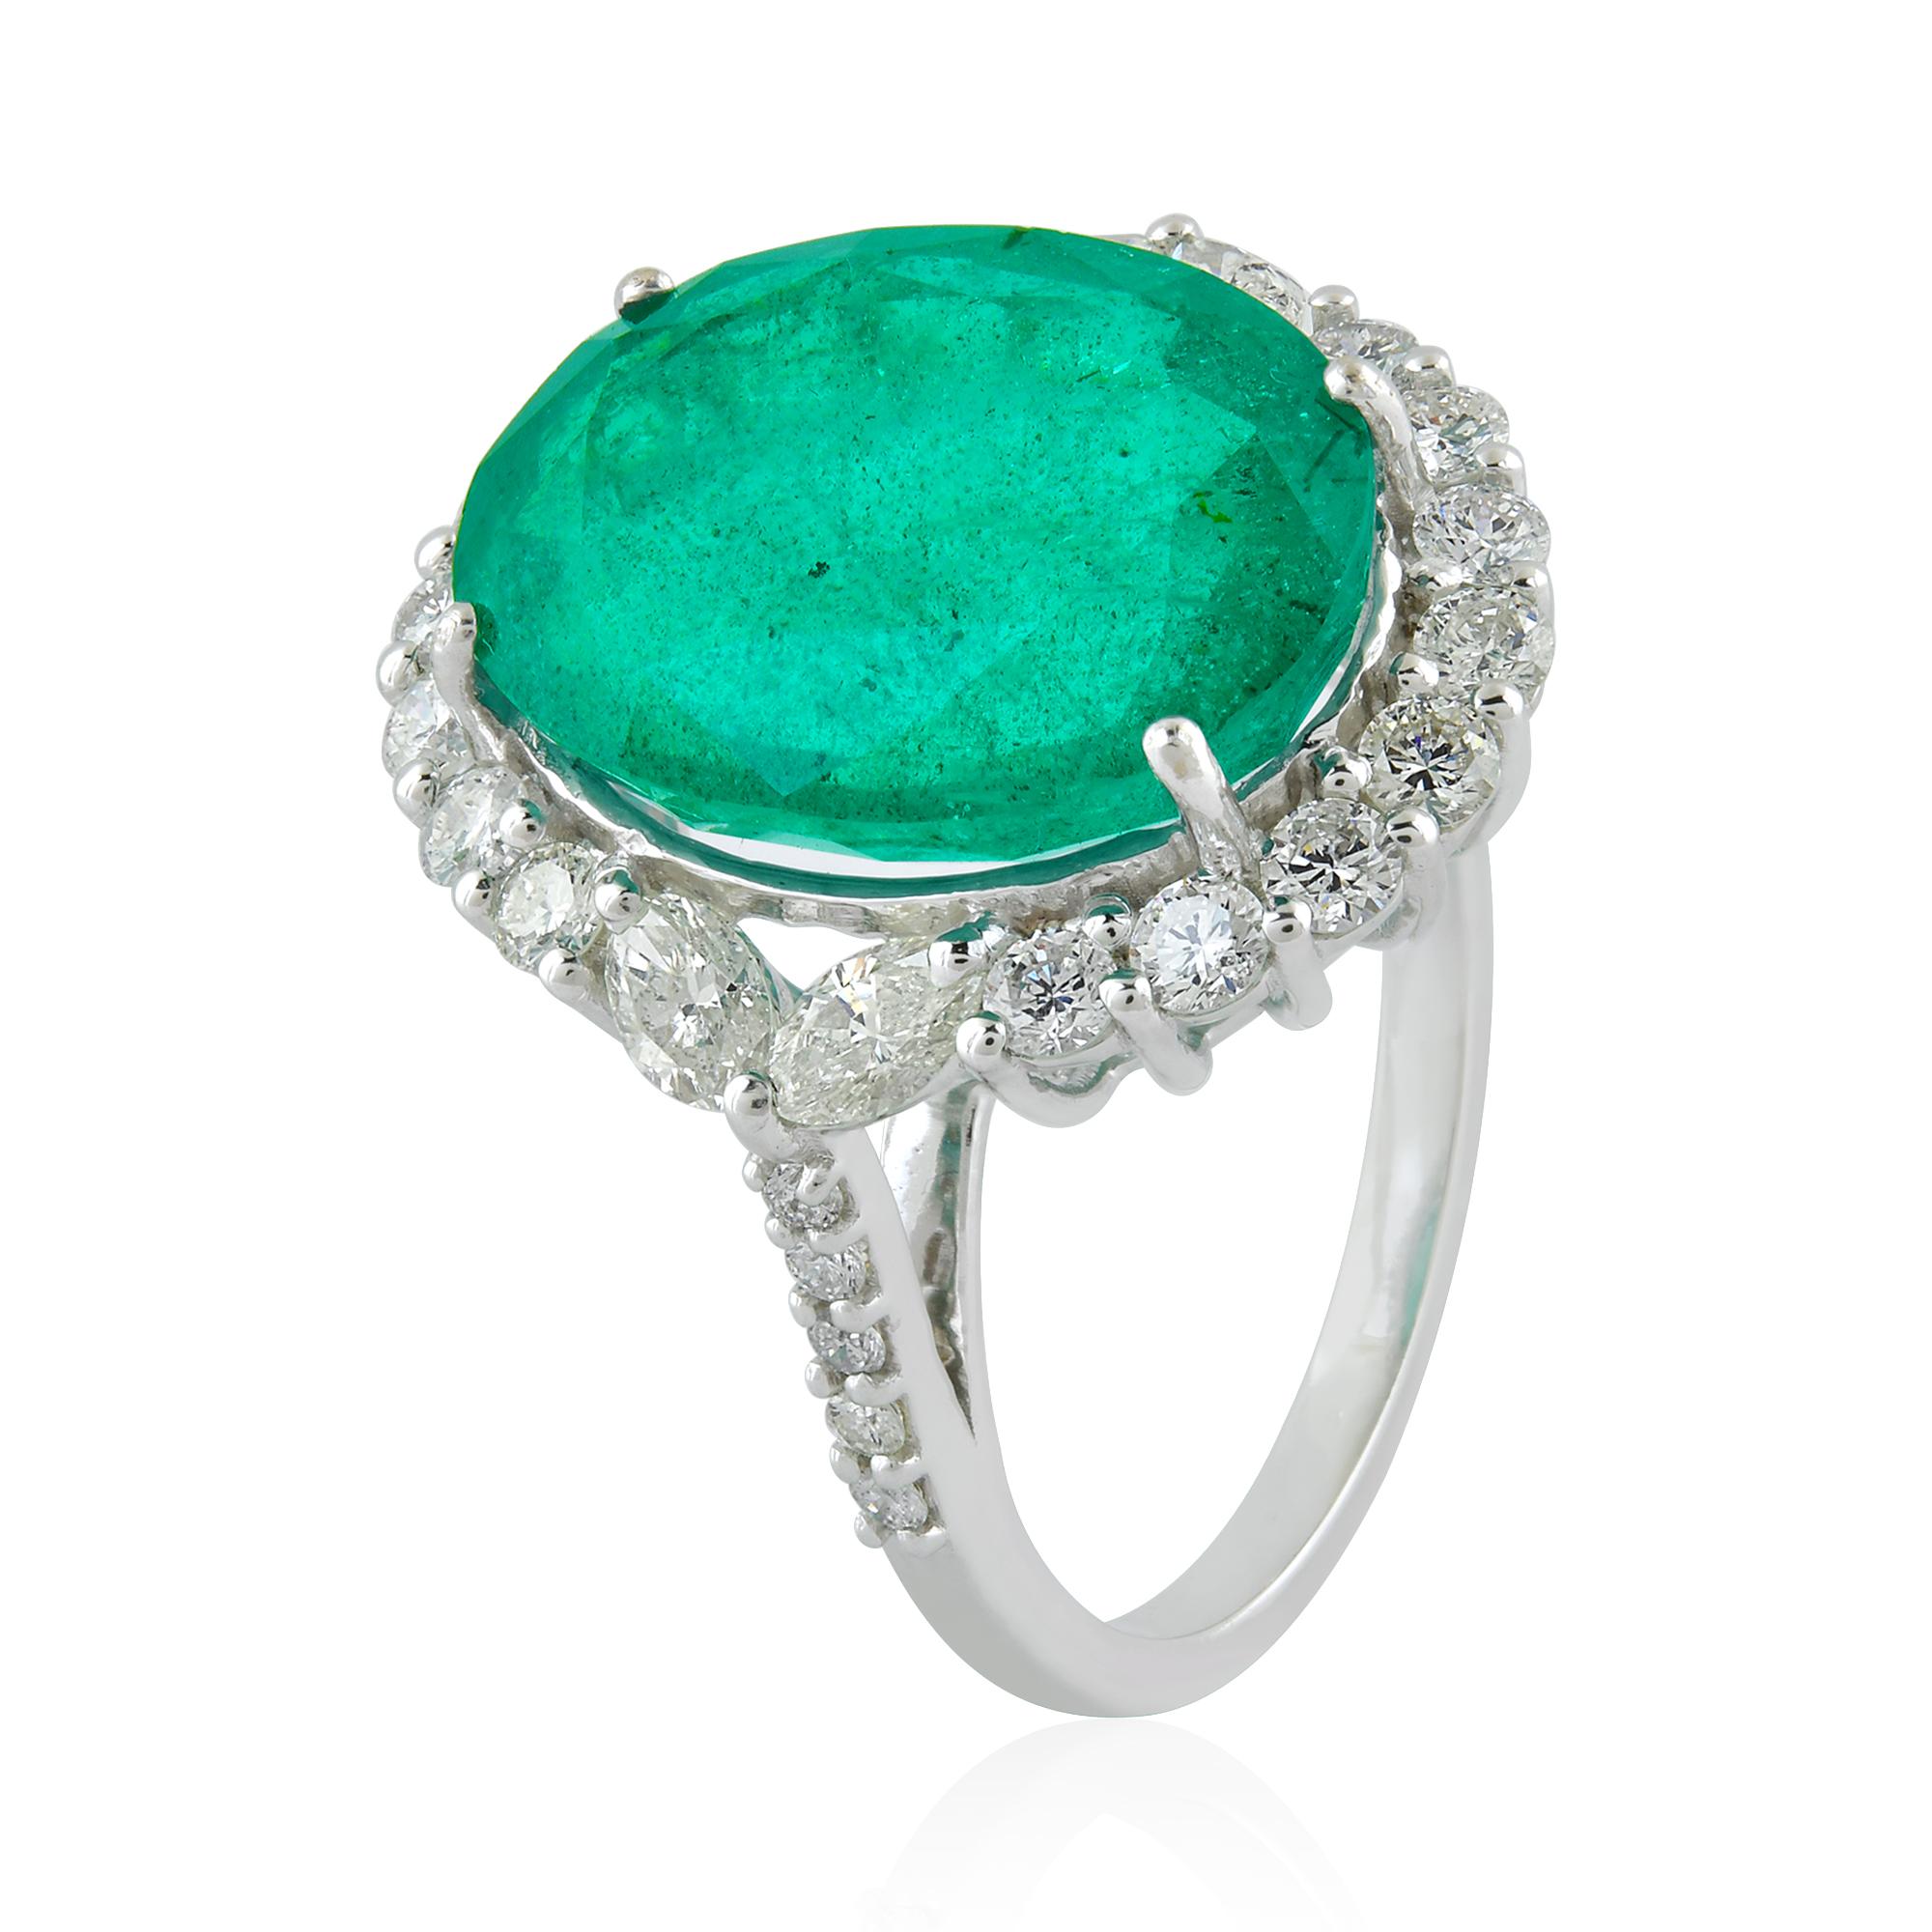 For Sale:  Oval Zambian Emerald Cocktail Ring Diamond Pave 18 Karat White Gold Fine Jewelry 4